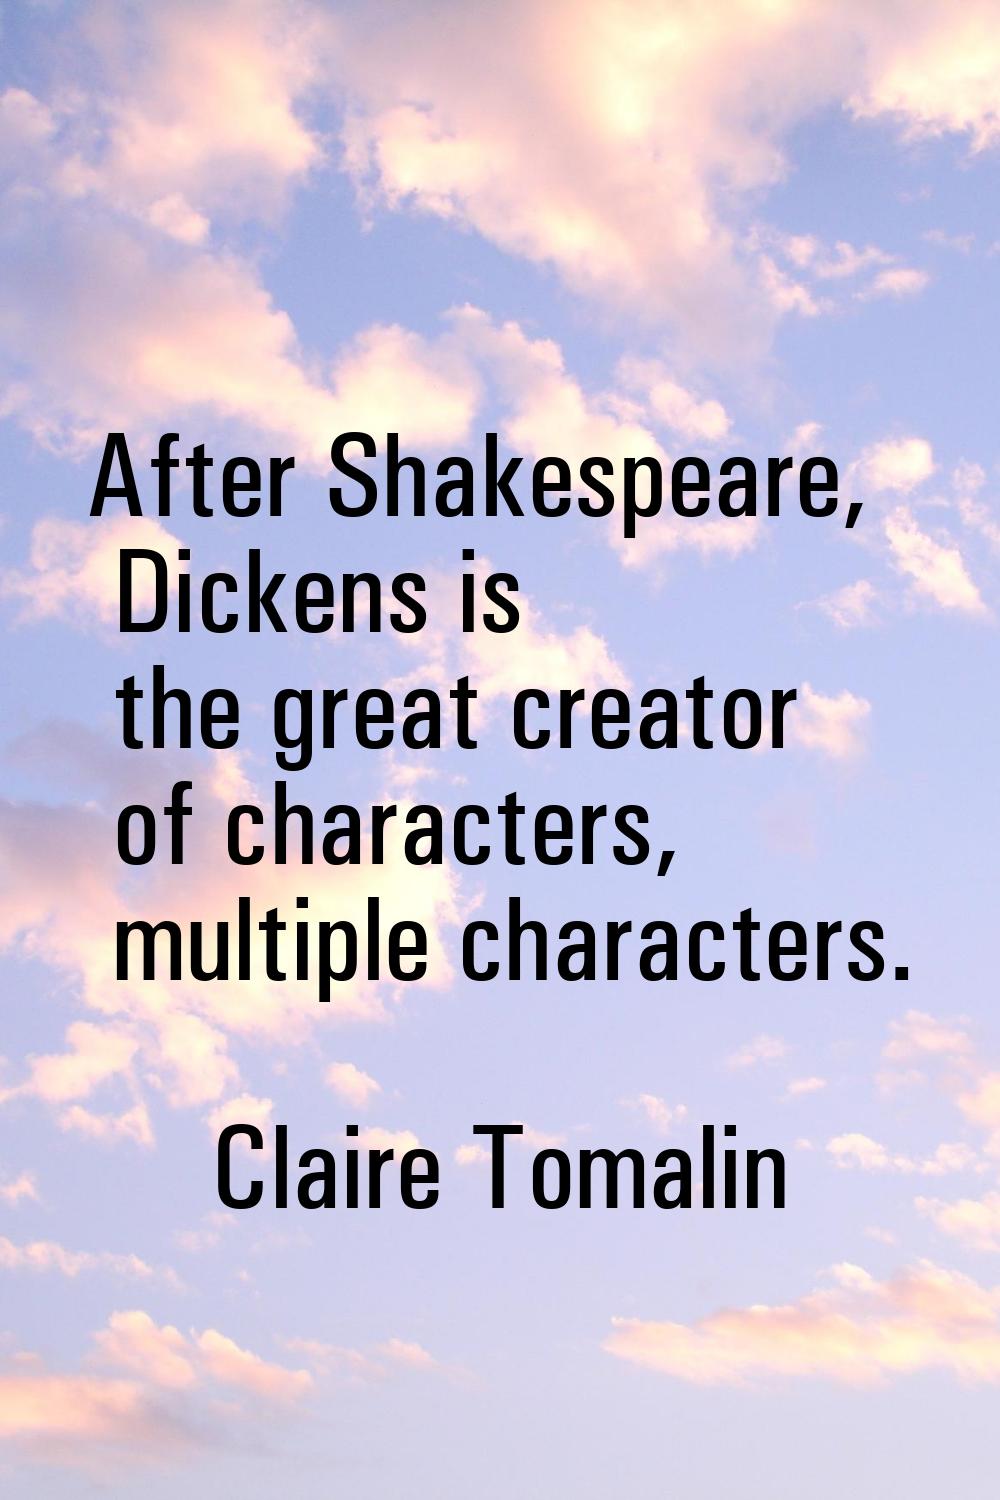 After Shakespeare, Dickens is the great creator of characters, multiple characters.